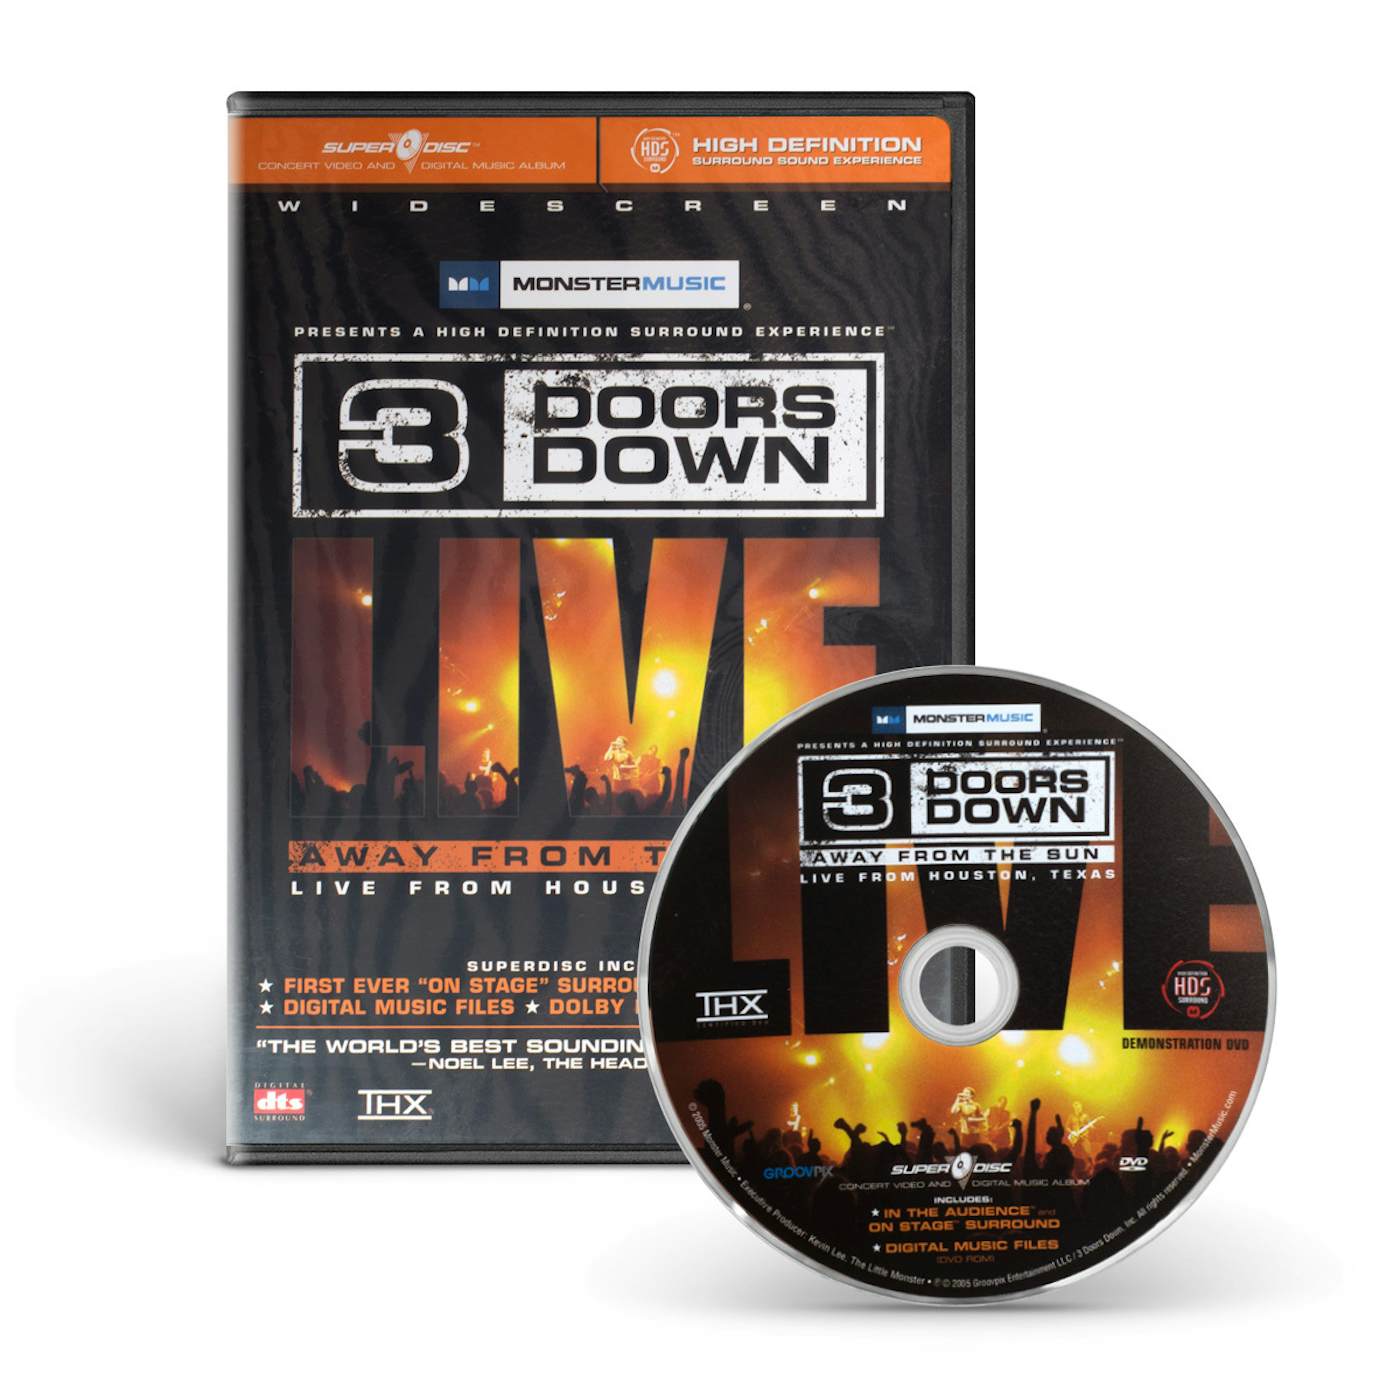 3 Doors Down Away from the sun, live from Houston, Texas DVD